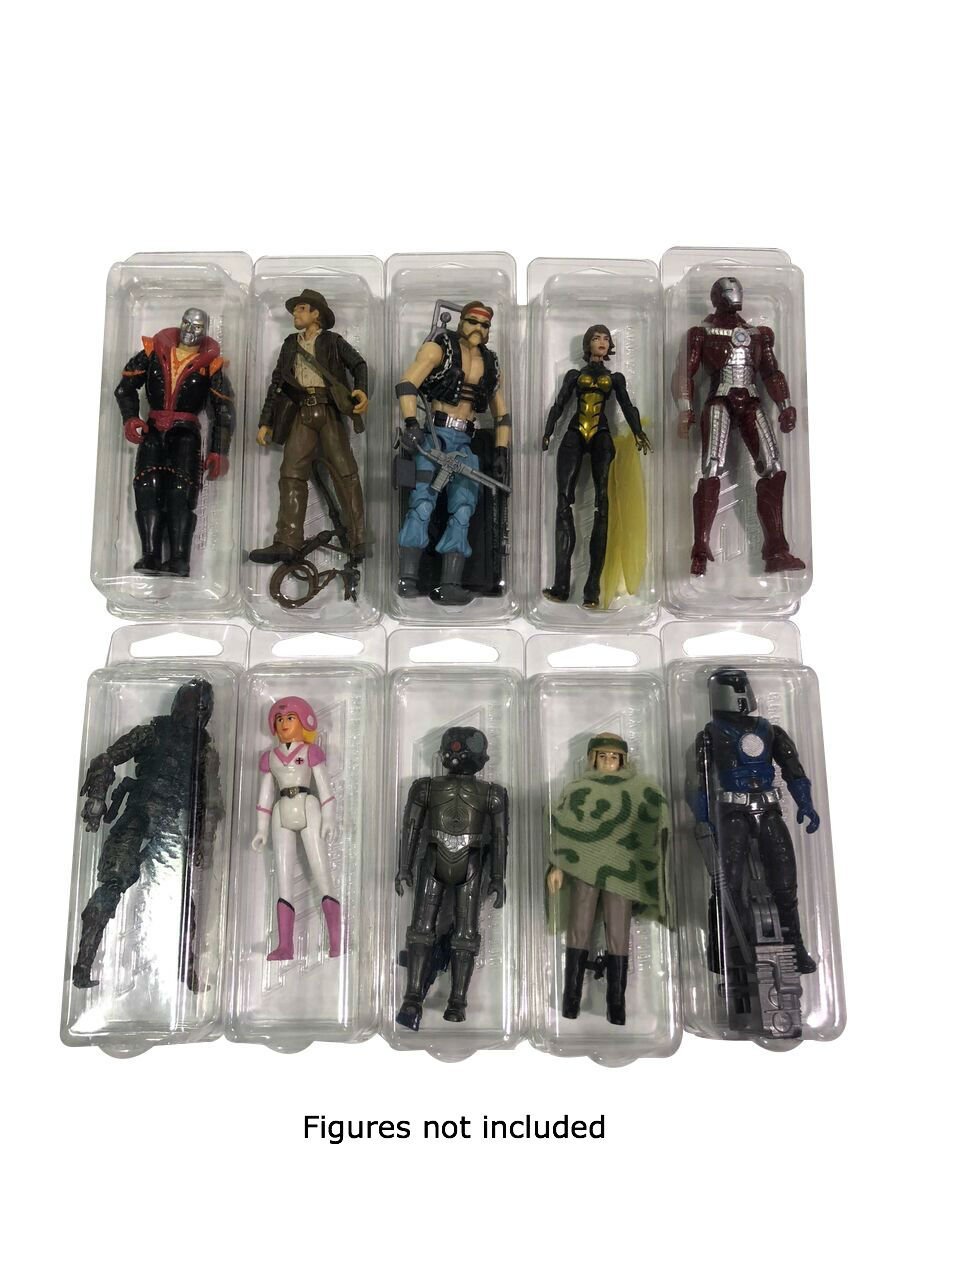 25 Protectors for Most Loose 3.75 Star Wars GI Joe & More Action Figures - $34.99